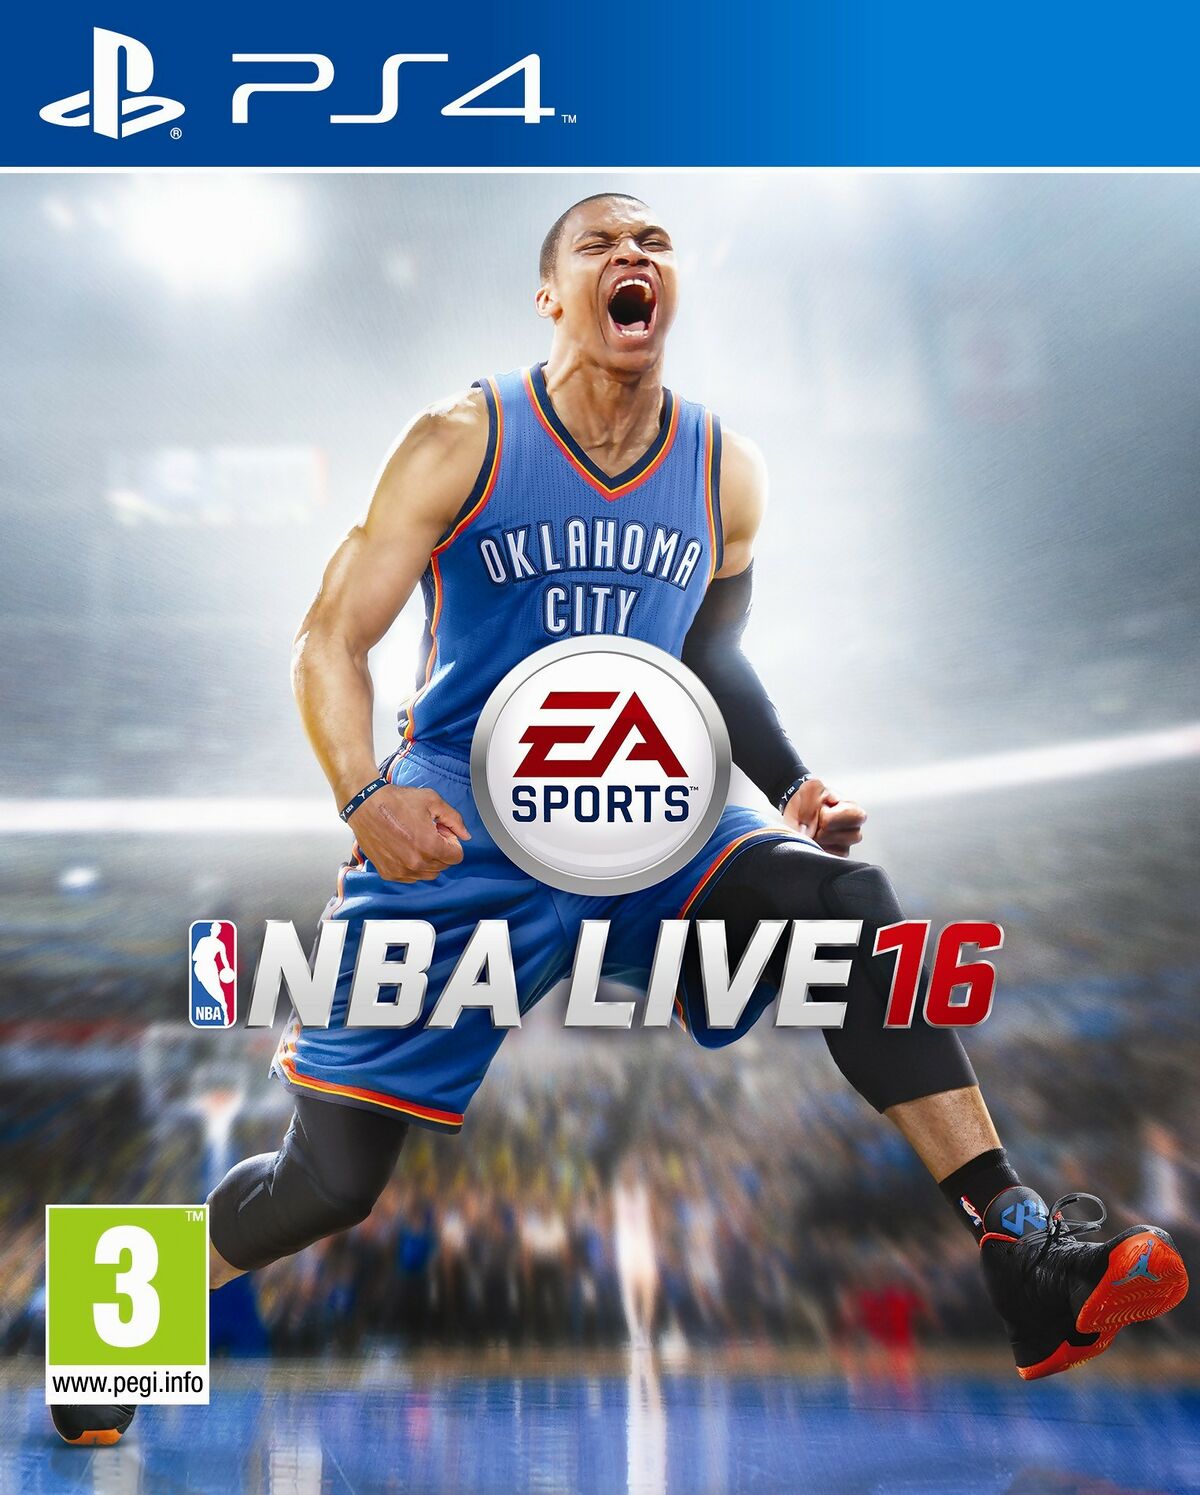 NBA Live 16 — StrategyWiki Strategy guide and game reference wiki